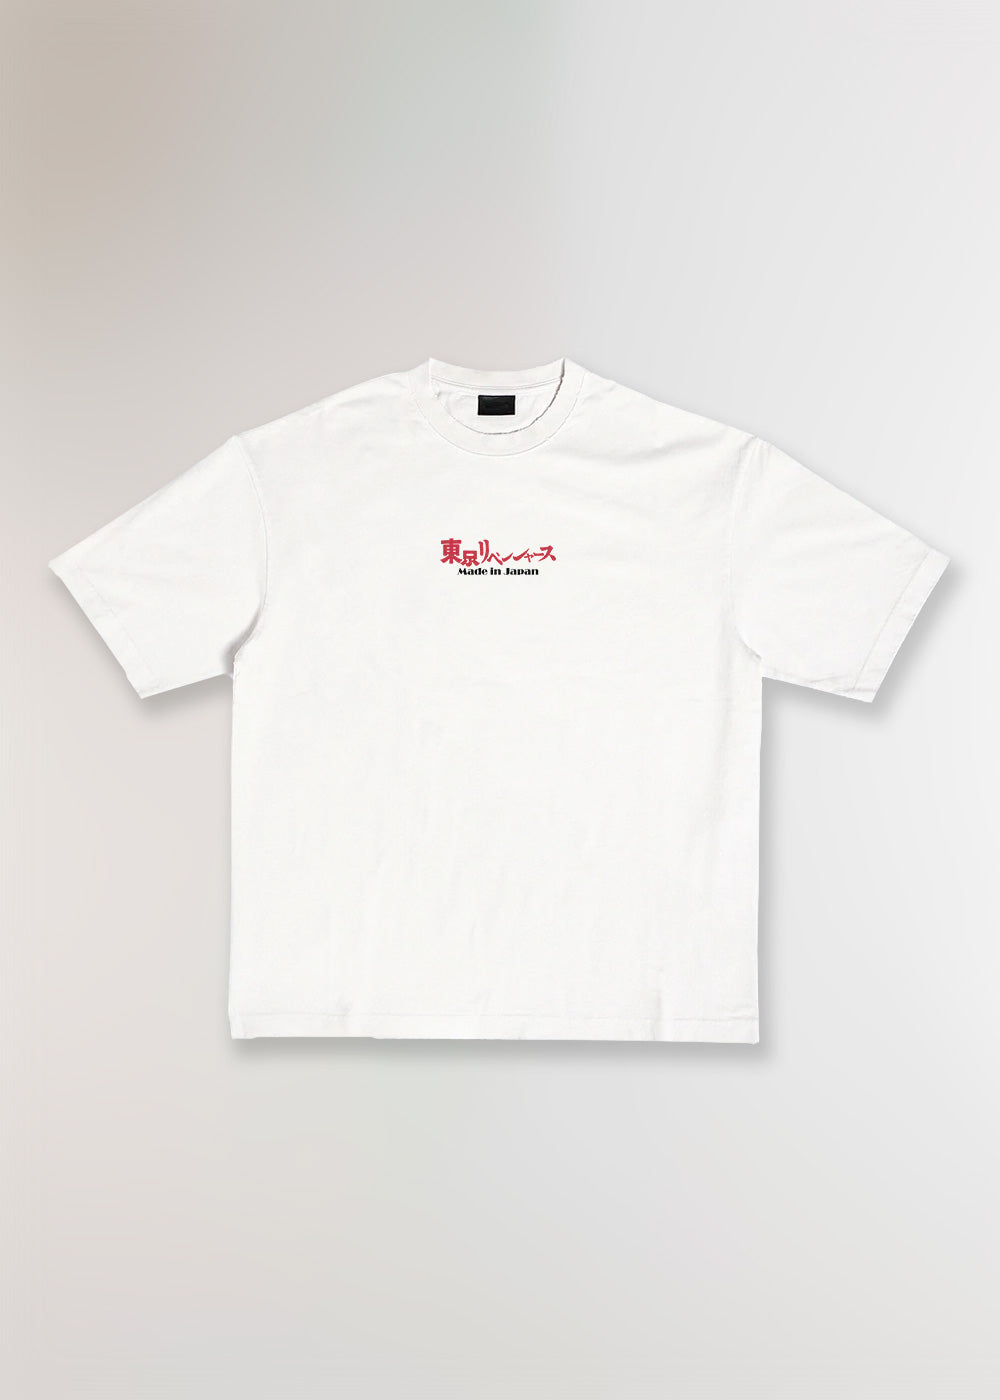 MADE IN JAPAN - MADE IN TOKYO® WHITE T-SHIRT